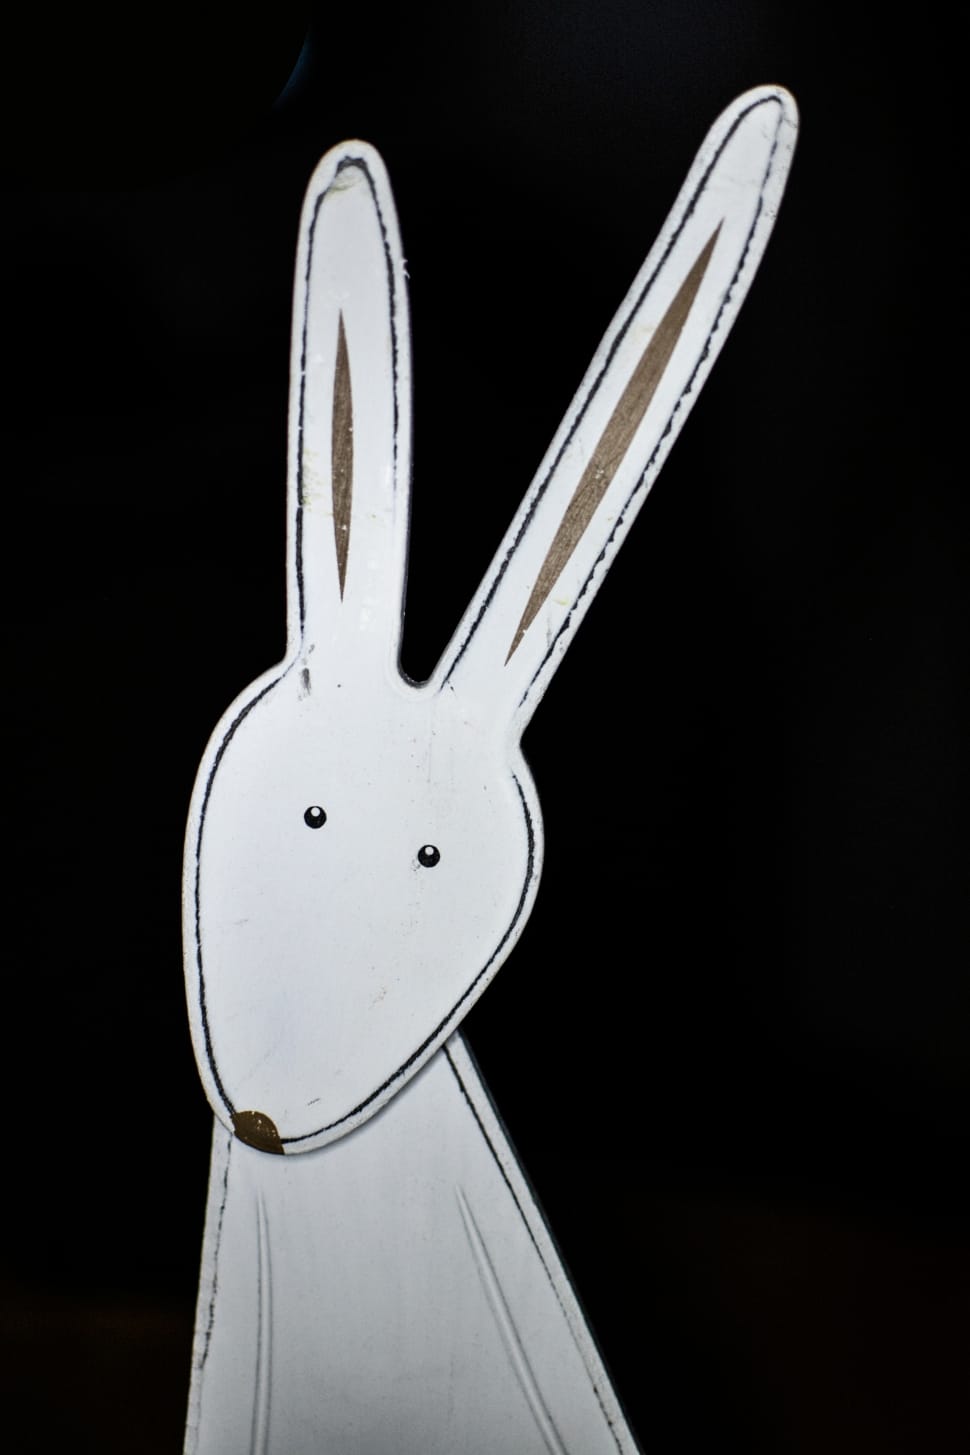 white and brown rabbit illustration preview